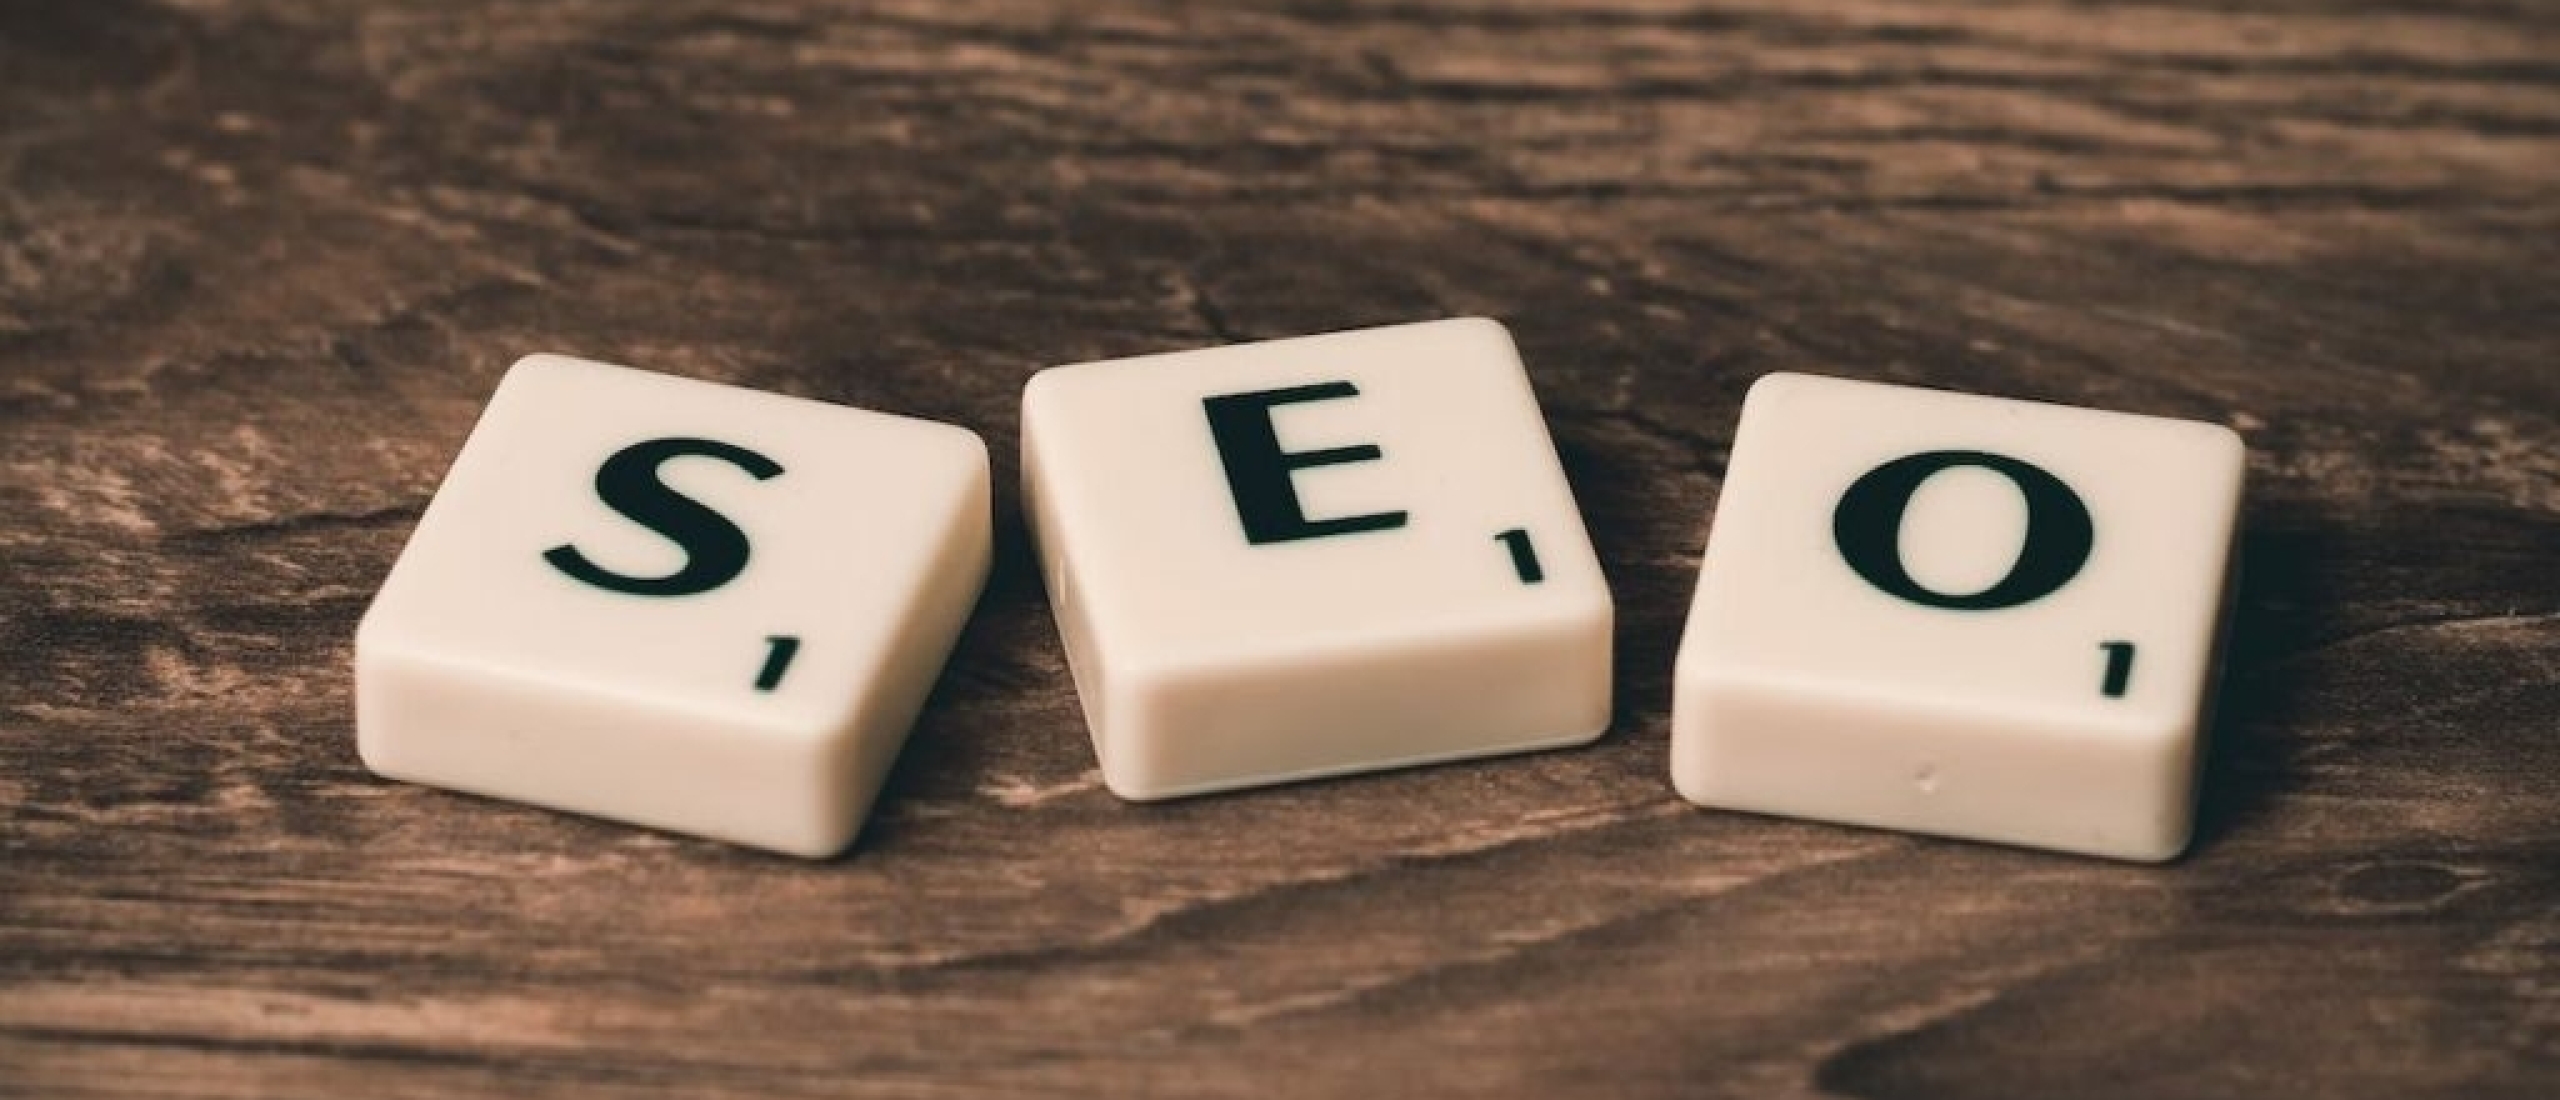 Common SEO Mistakes and How to Avoid Them